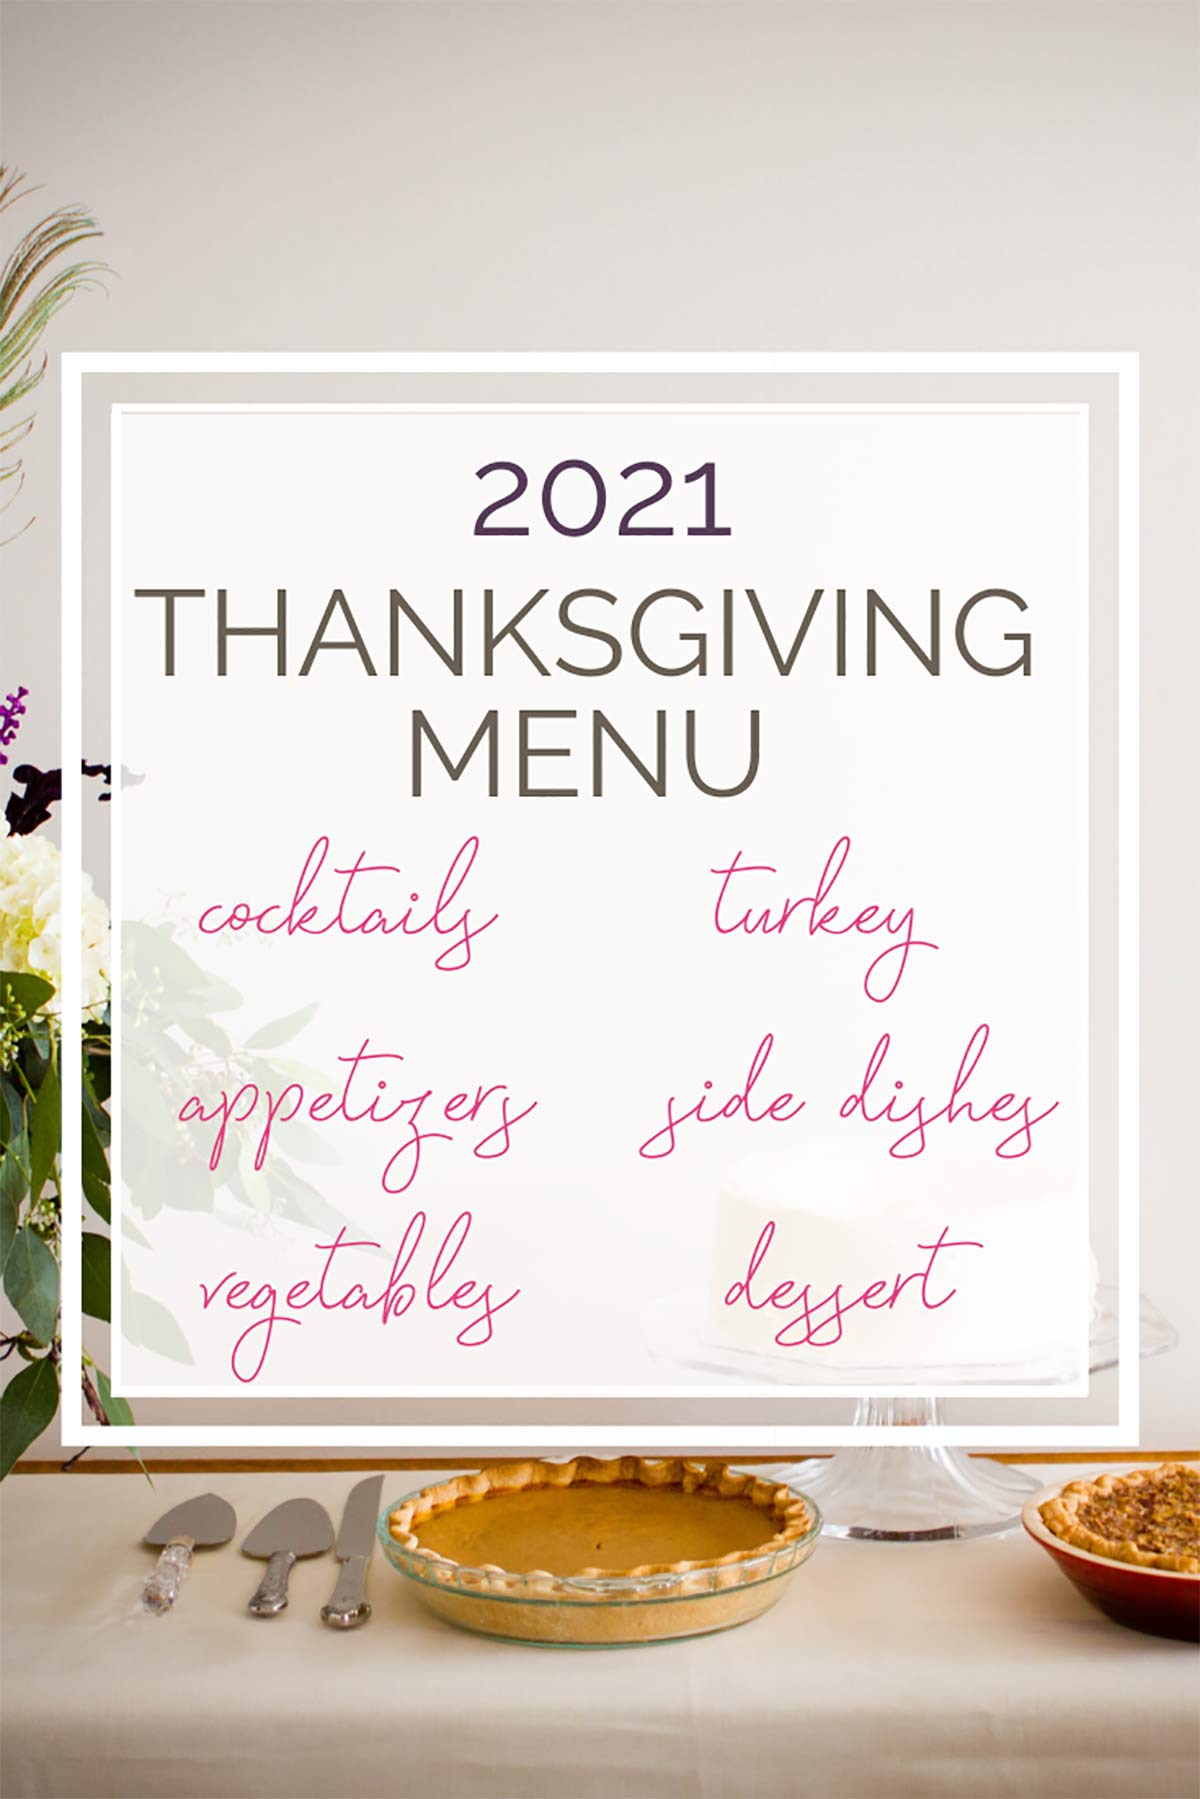 Thanksgiving dessert table with text overlay of headings for Thanksgiving menu.